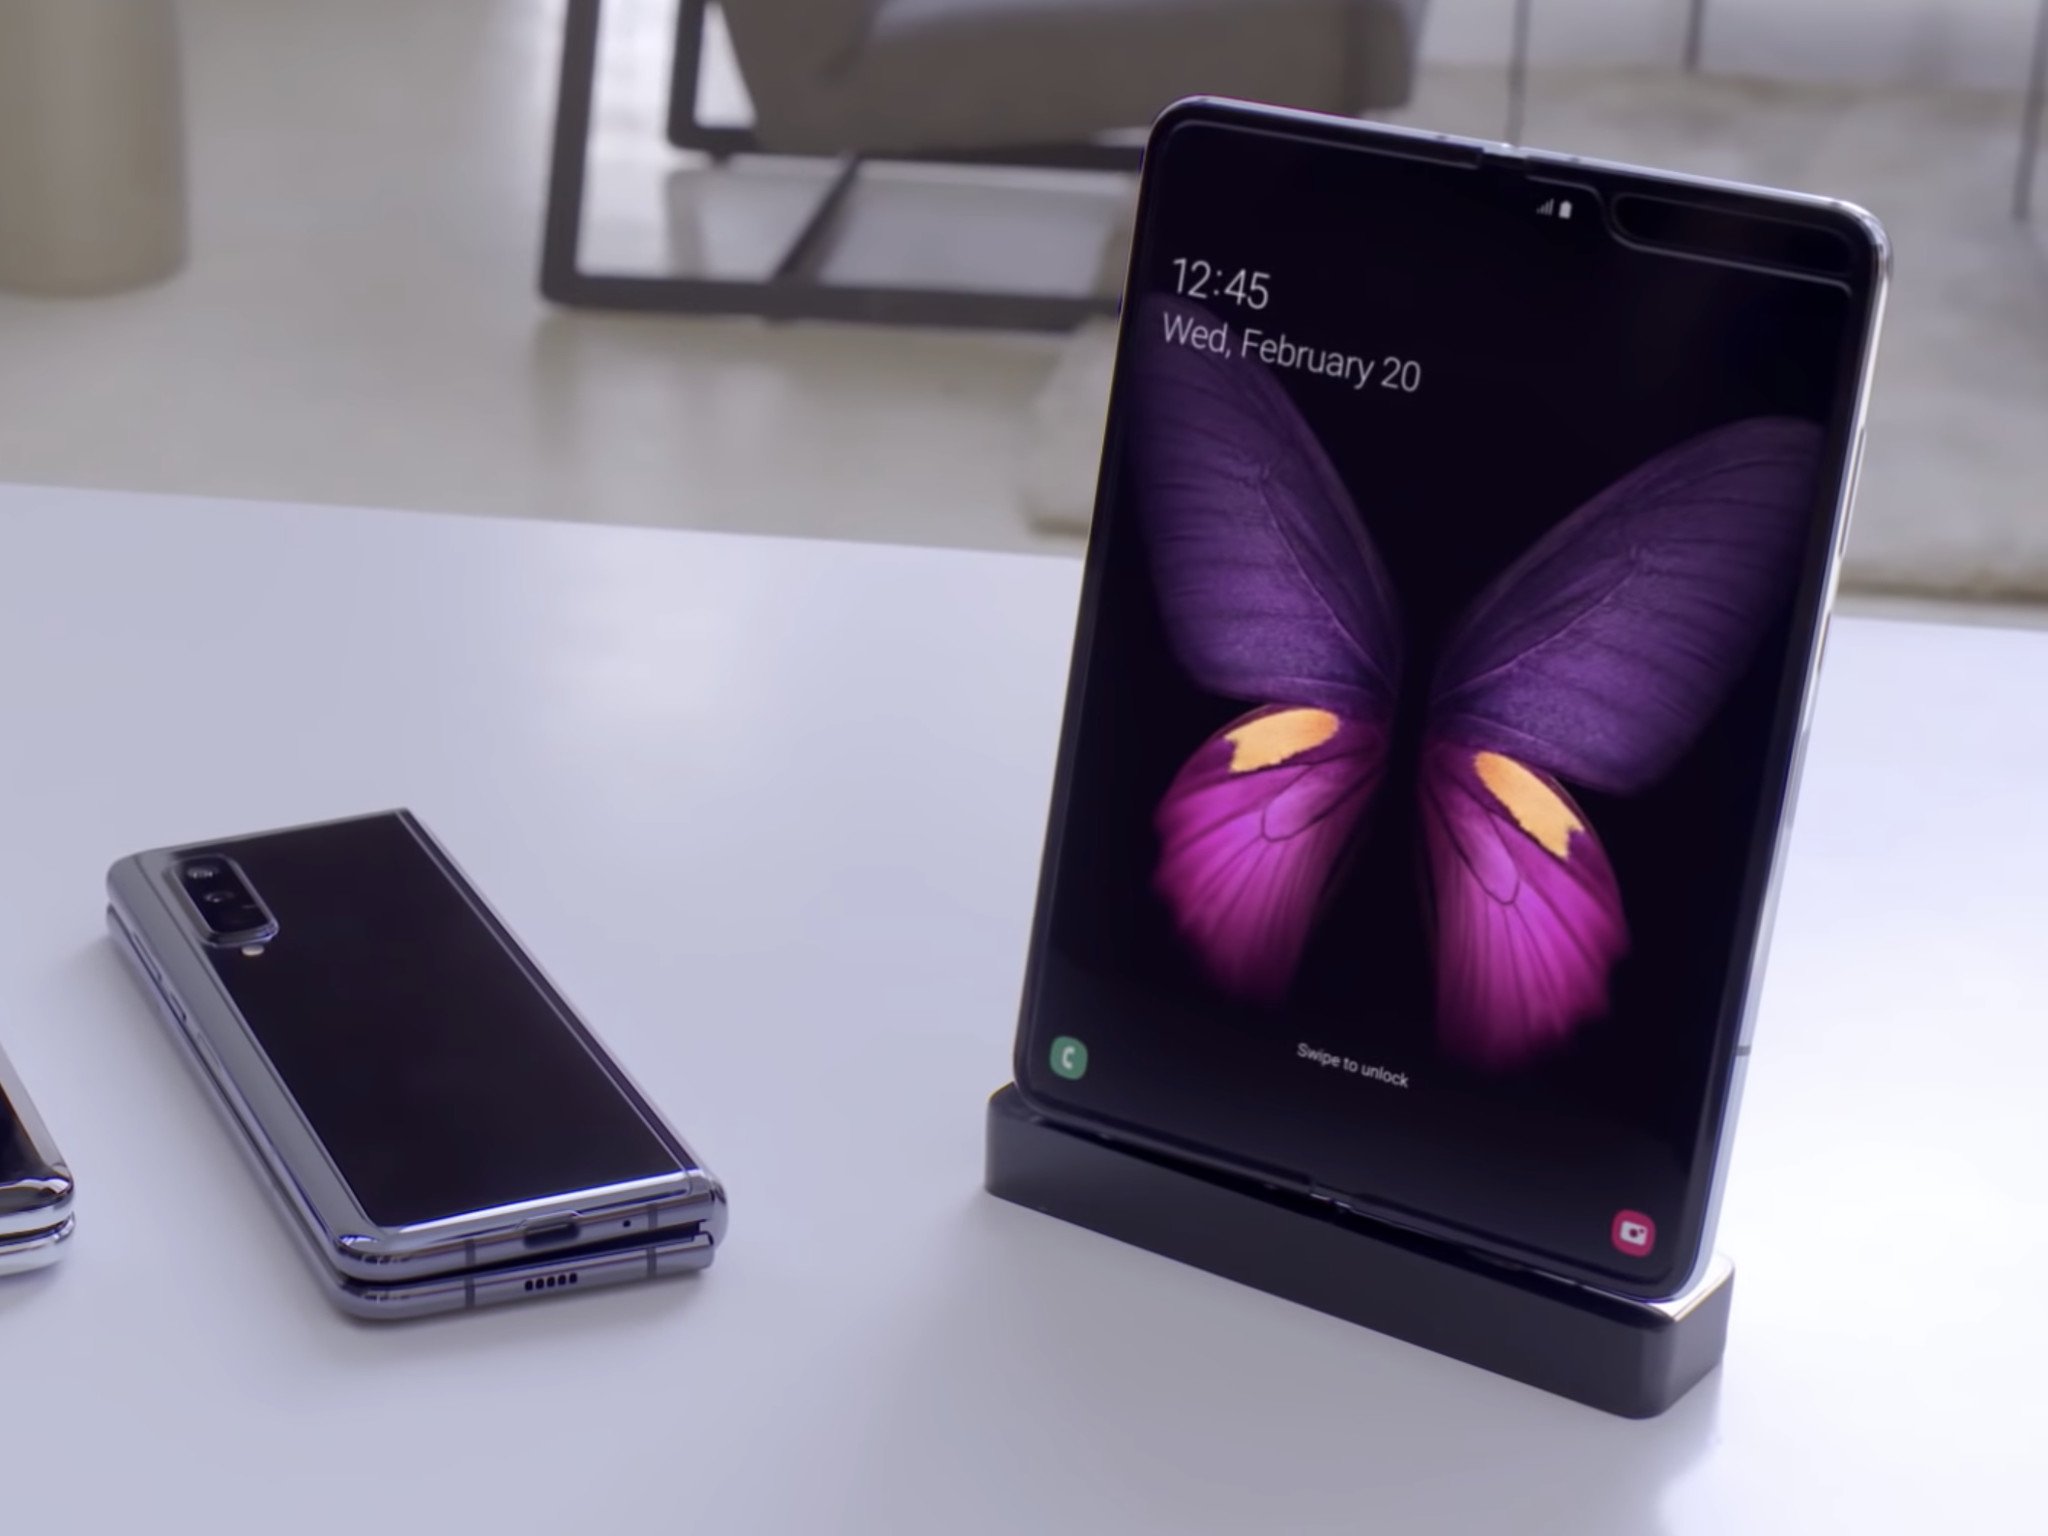 https://www.androidcentral.com/sites/androidcentral.com/files/styles/large/public/article_images/2019/02/galaxy-fold-live-shot-samsung-promo.jpg?itok=fkx7COi3